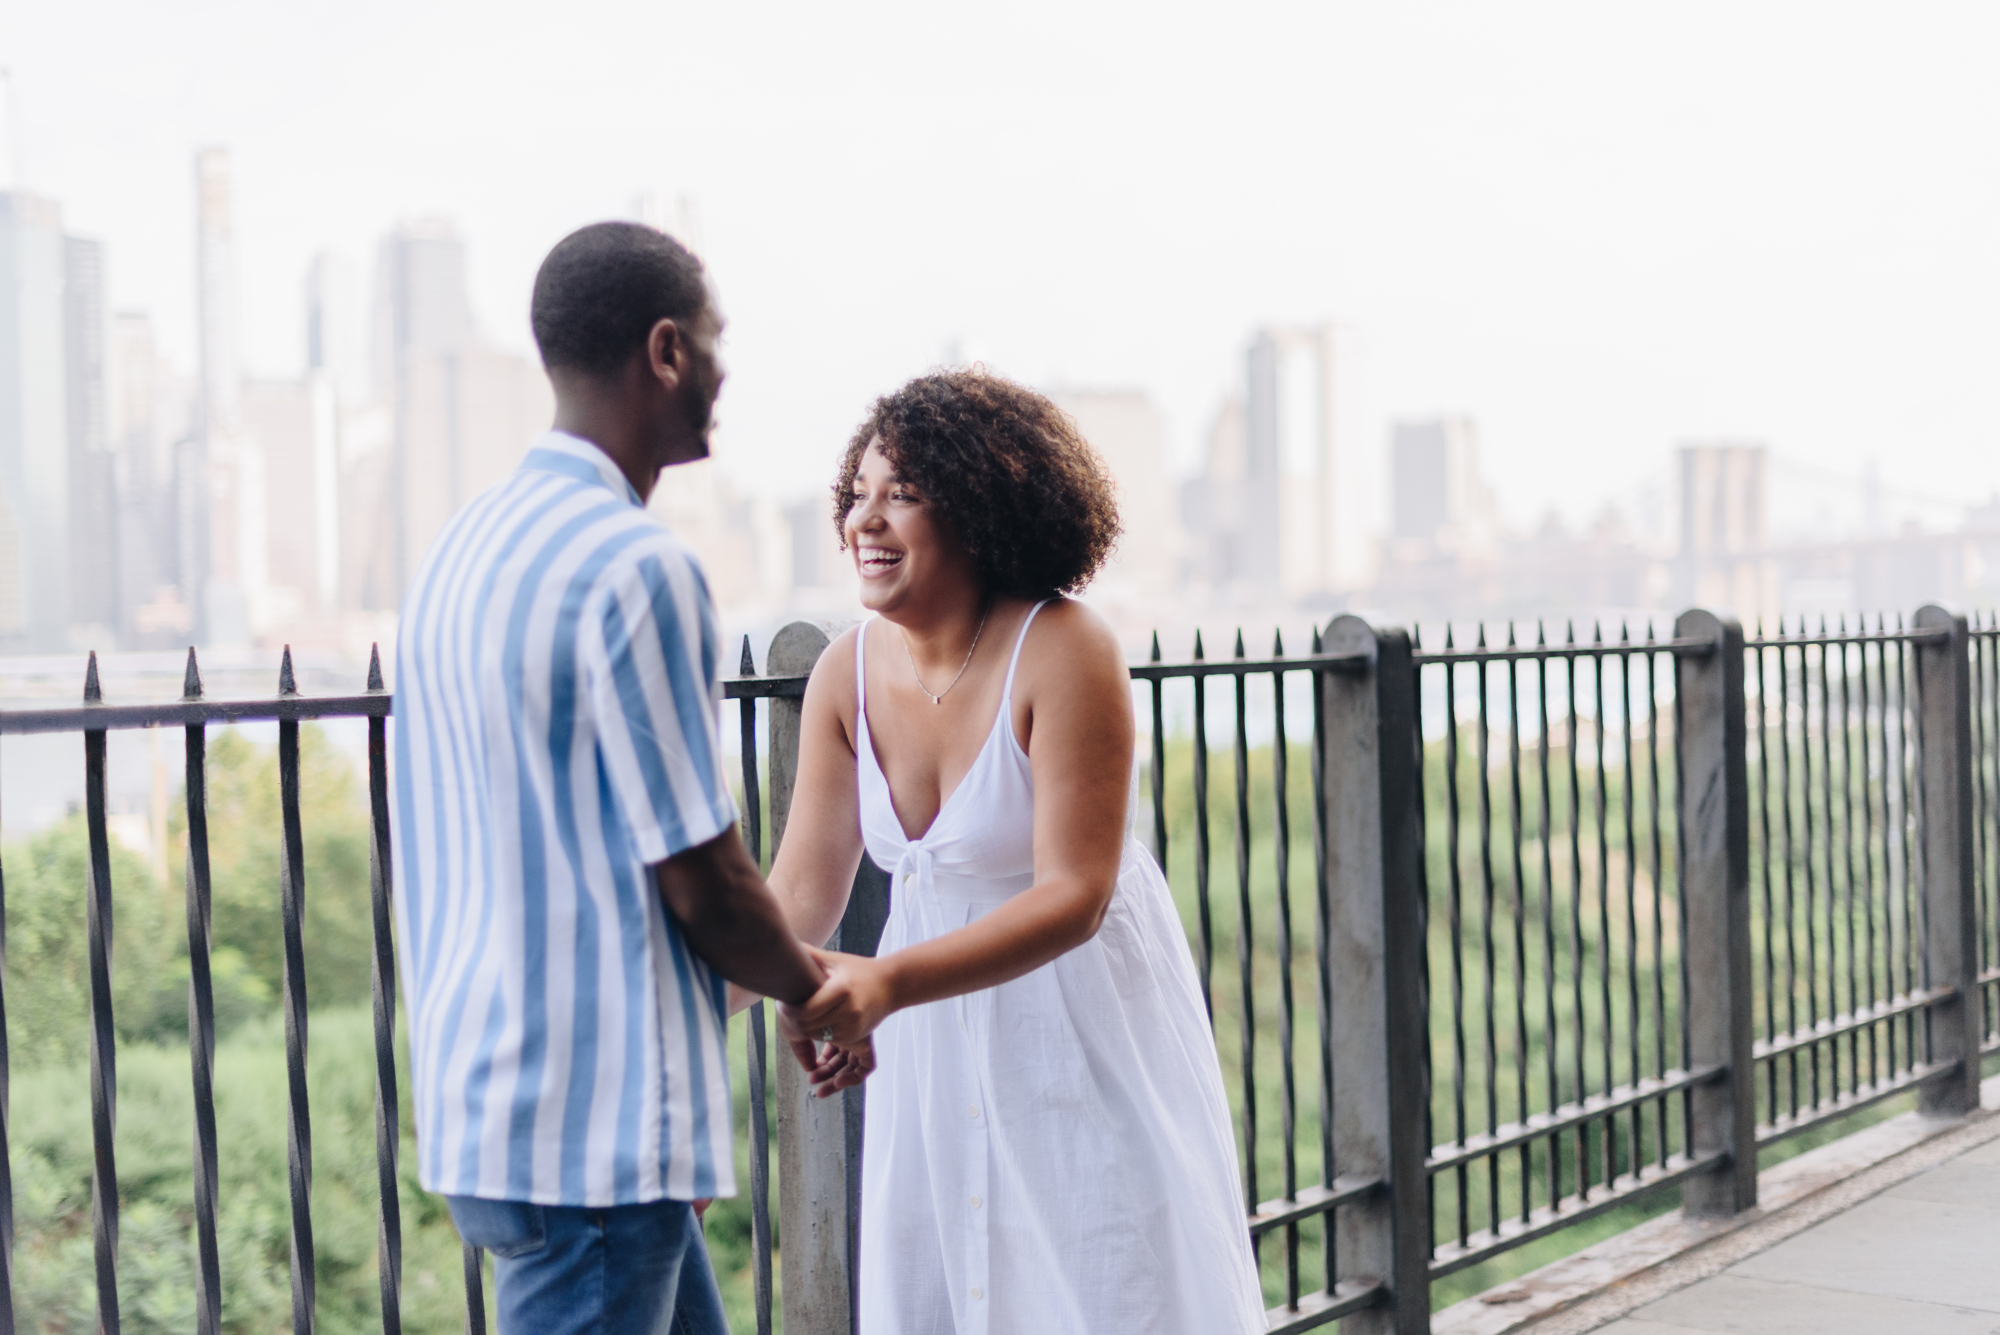 Picturesque Summer Engagement Photos in Brooklyn Heights